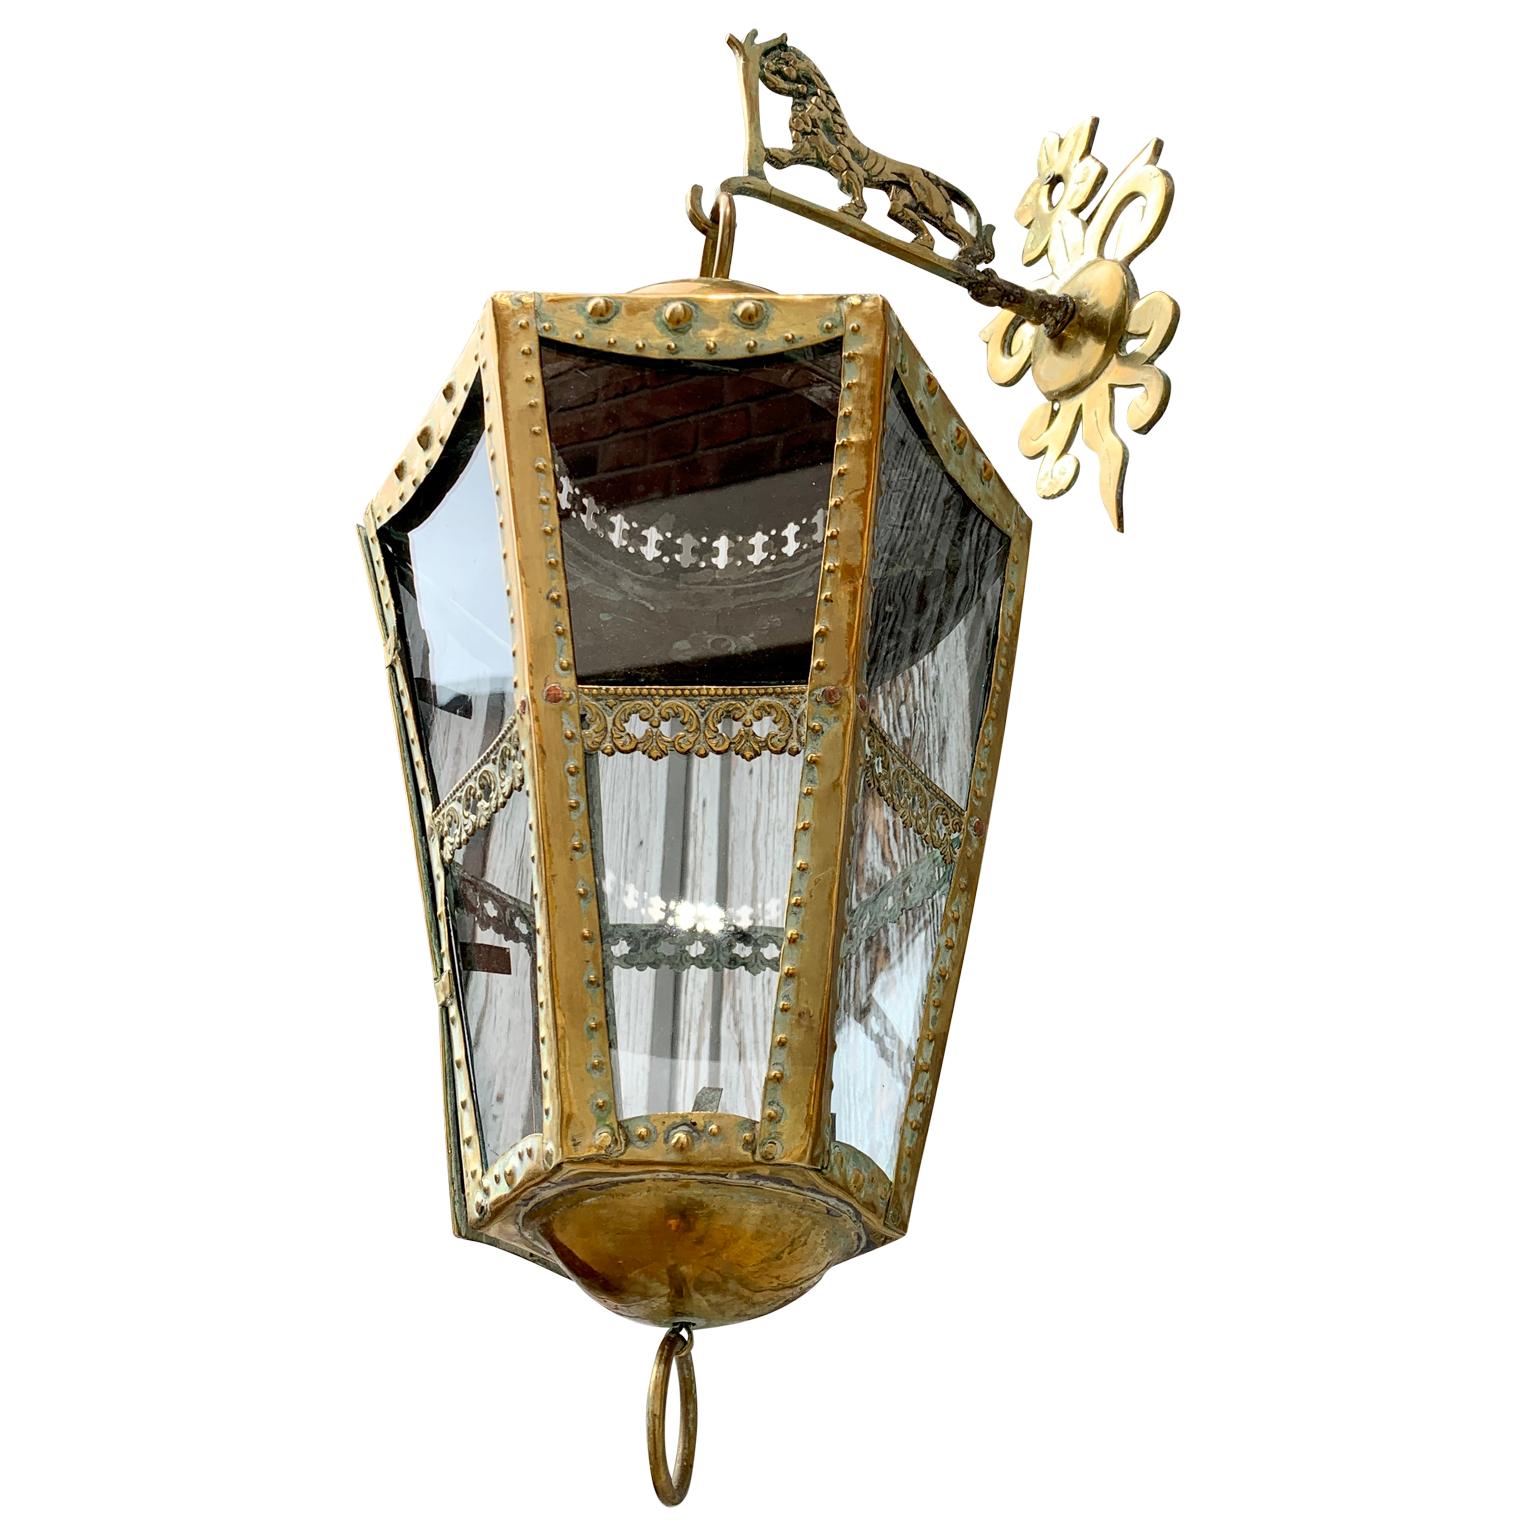 Large 19th Century Dutch Brass Wall Mounted Lantern In Good Condition For Sale In Haddonfield, NJ